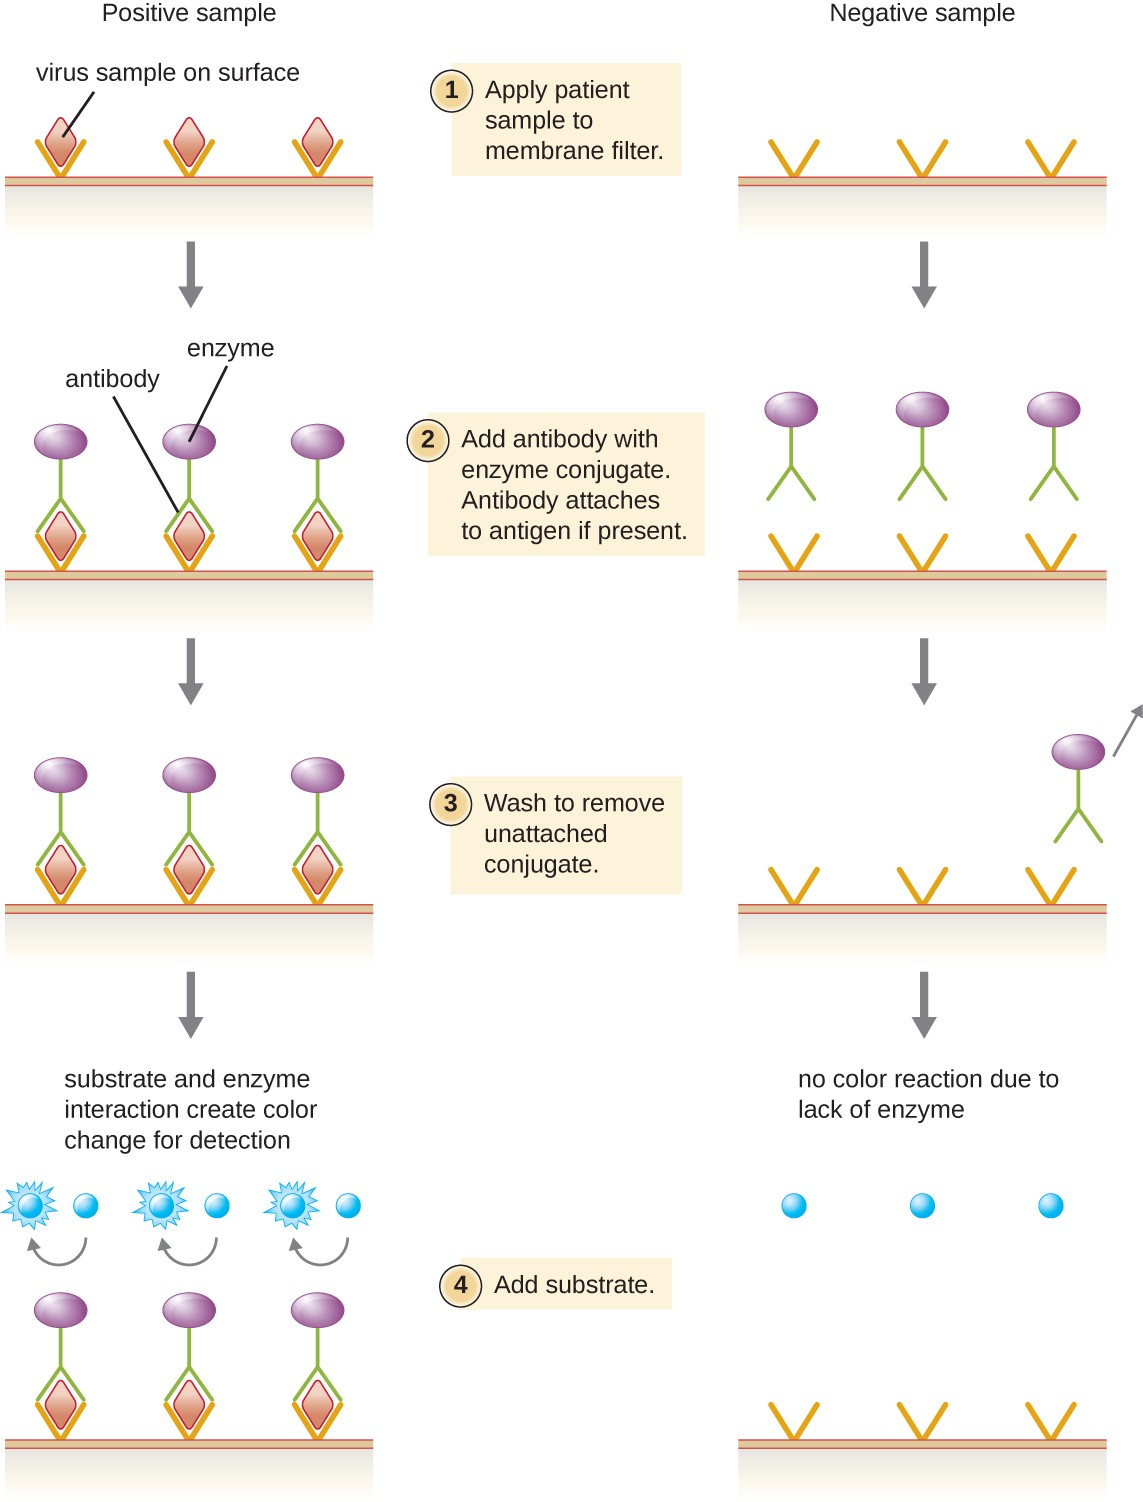 The explanation of EIA is separated to show what occurs in a positive sample and what occurs in a negative sample. First patient sample is applied to a membrane filter. If the sample contains viruses they are trapped by the filter. Next, antibody with enzyme conjugate is added. Antibody will attach to antigen if present. Next is a wash step. If the virus is present the enzyme binds to the virus, otherwise the enzyme washes away. Finally substrate is added. If the antibody is present (because it is bound to the virus) the attached enzyme causes a color change. If no enzyme linked antibody is present, no color change occurs.